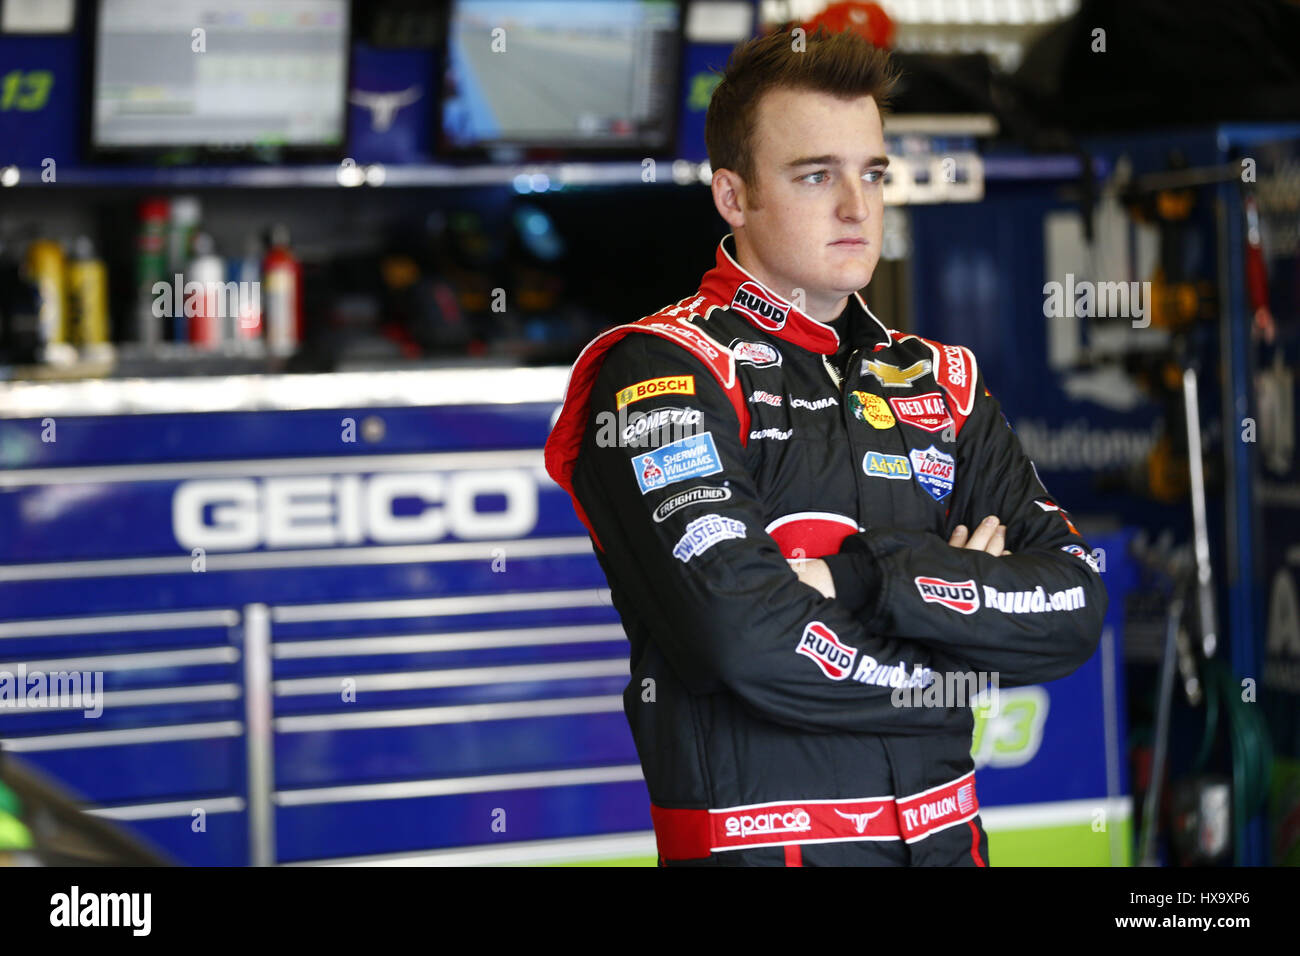 Fontana, California, USA. 25th Mar, 2017. March 25, 2017 - Fontana, California, USA: Ty Dillon (13) hangs out in the garage during practice for the Auto Club 400 at Auto Club Speedway in Fontana, California. Credit: Jusitn R. Noe Asp Inc/ASP/ZUMA Wire/Alamy Live News Stock Photo